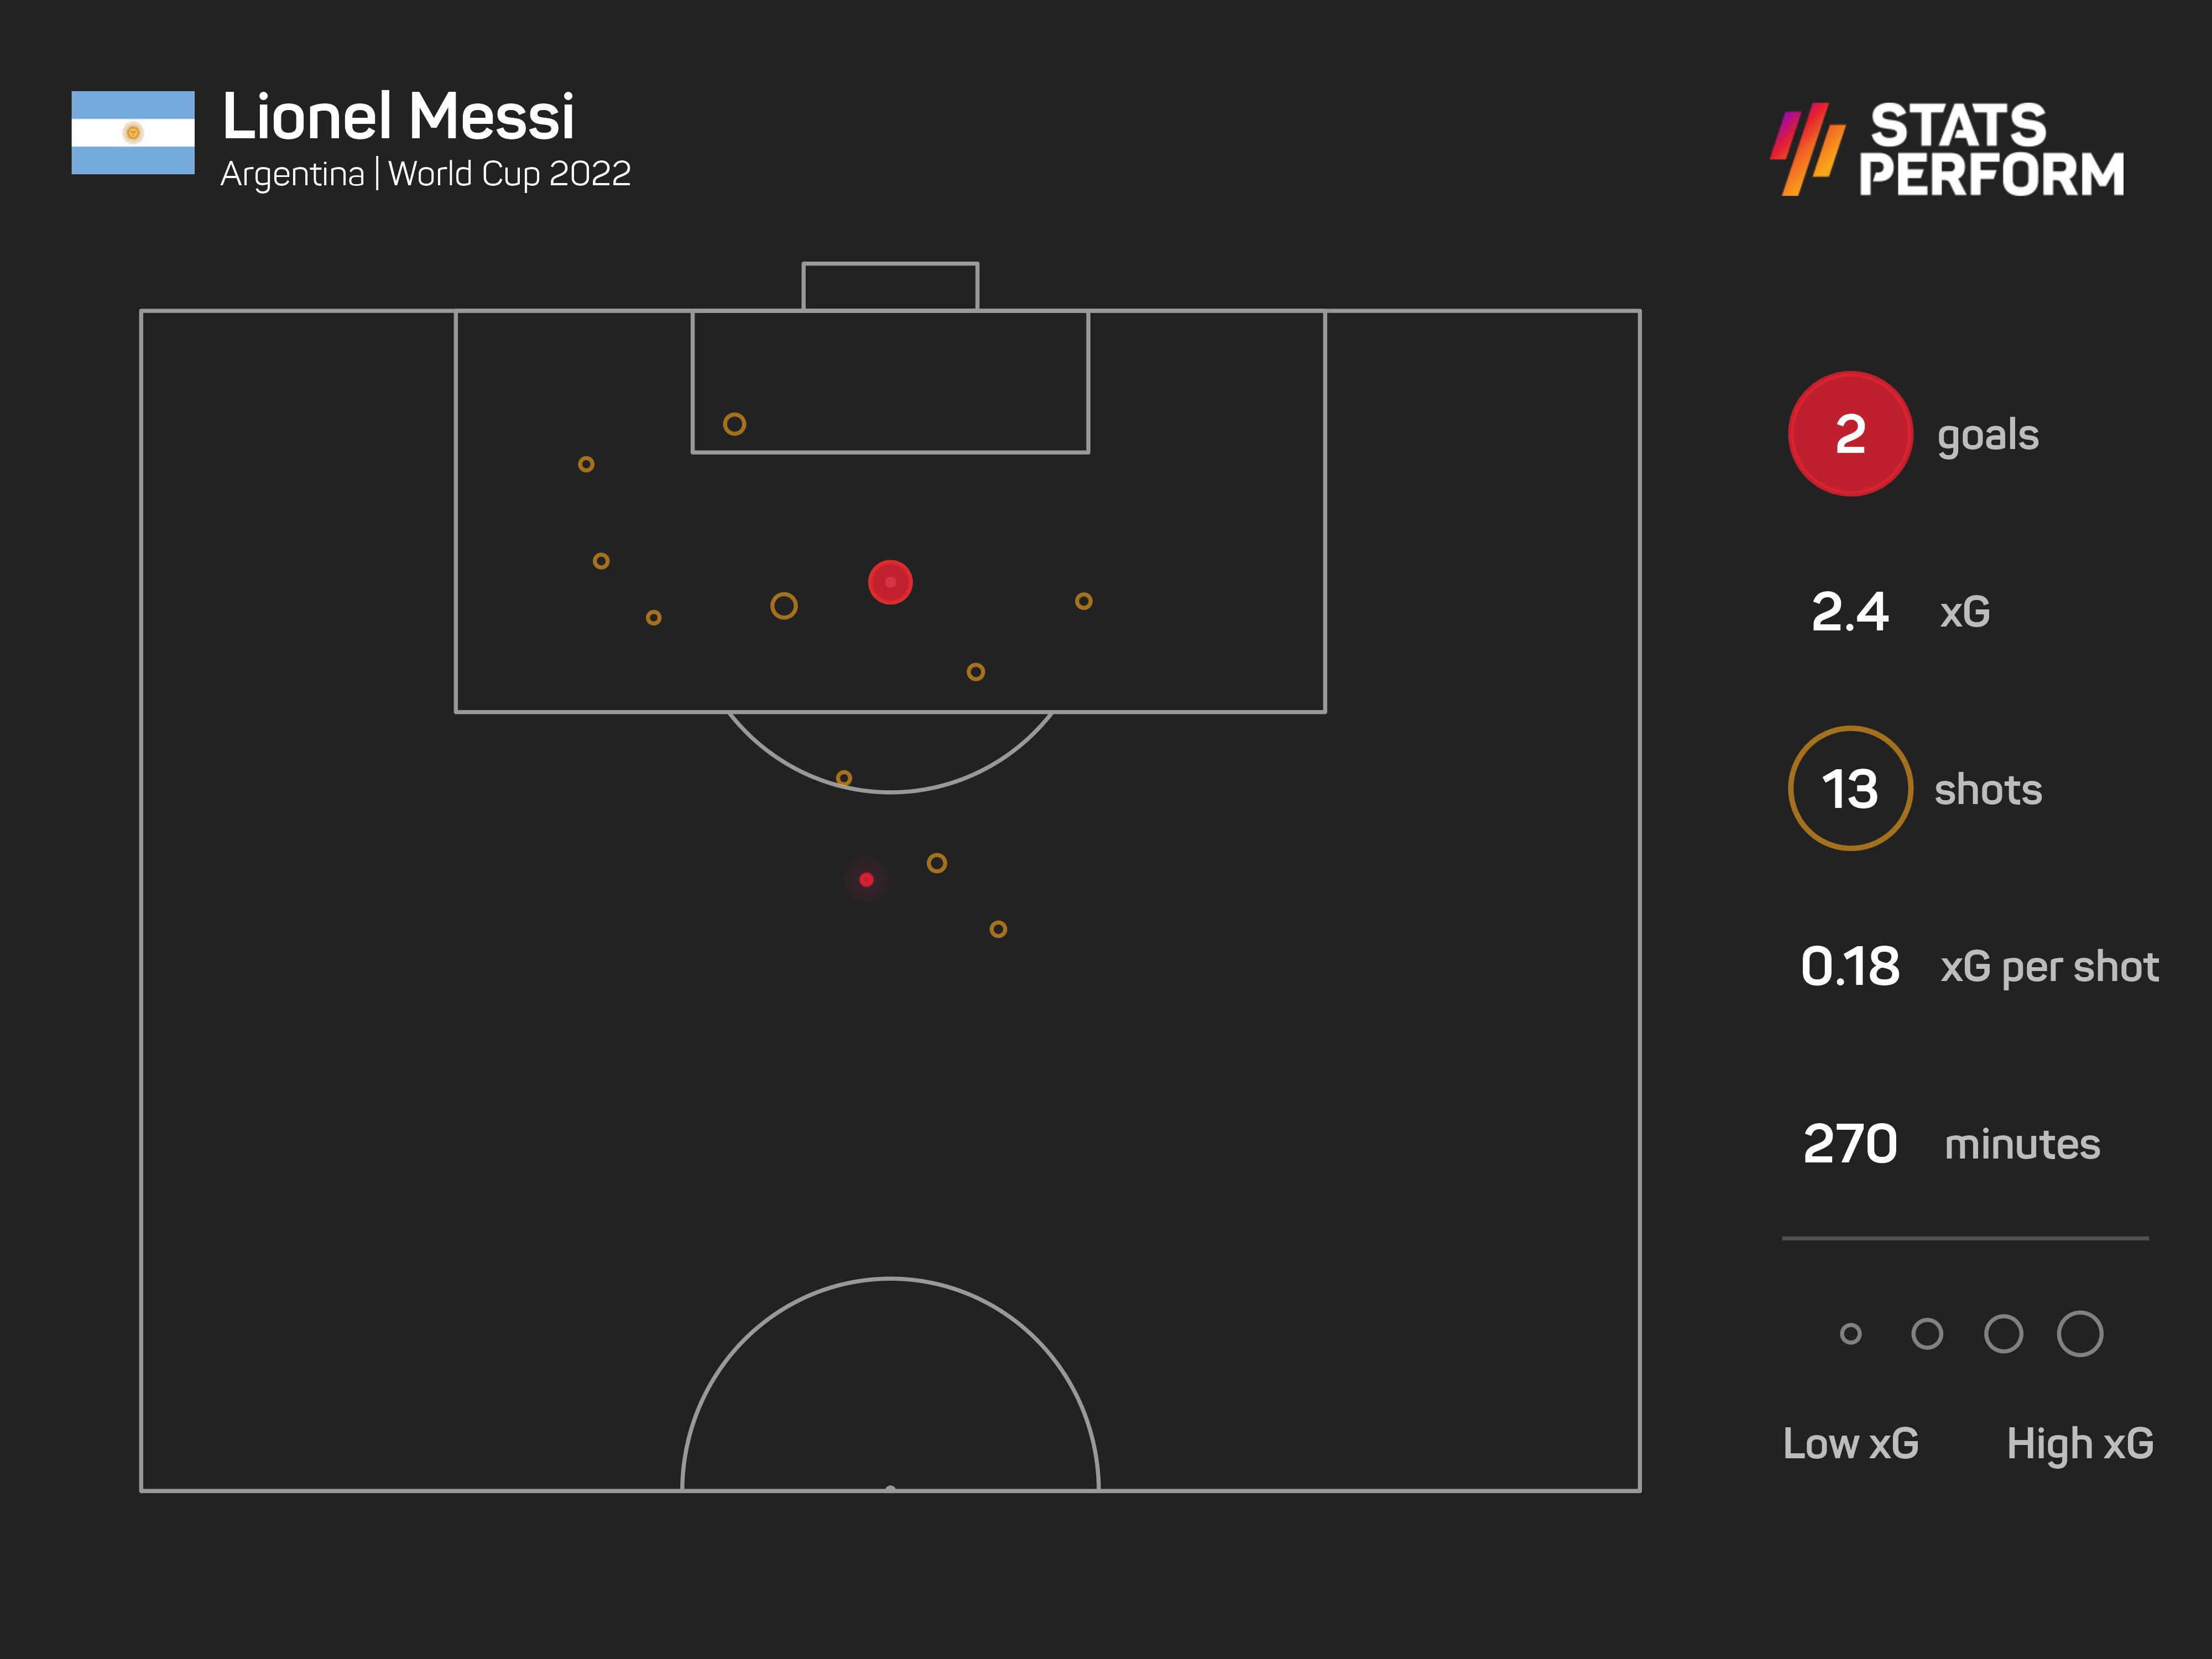 Lionel Messi has scored two goals at the 2022 World Cup so far